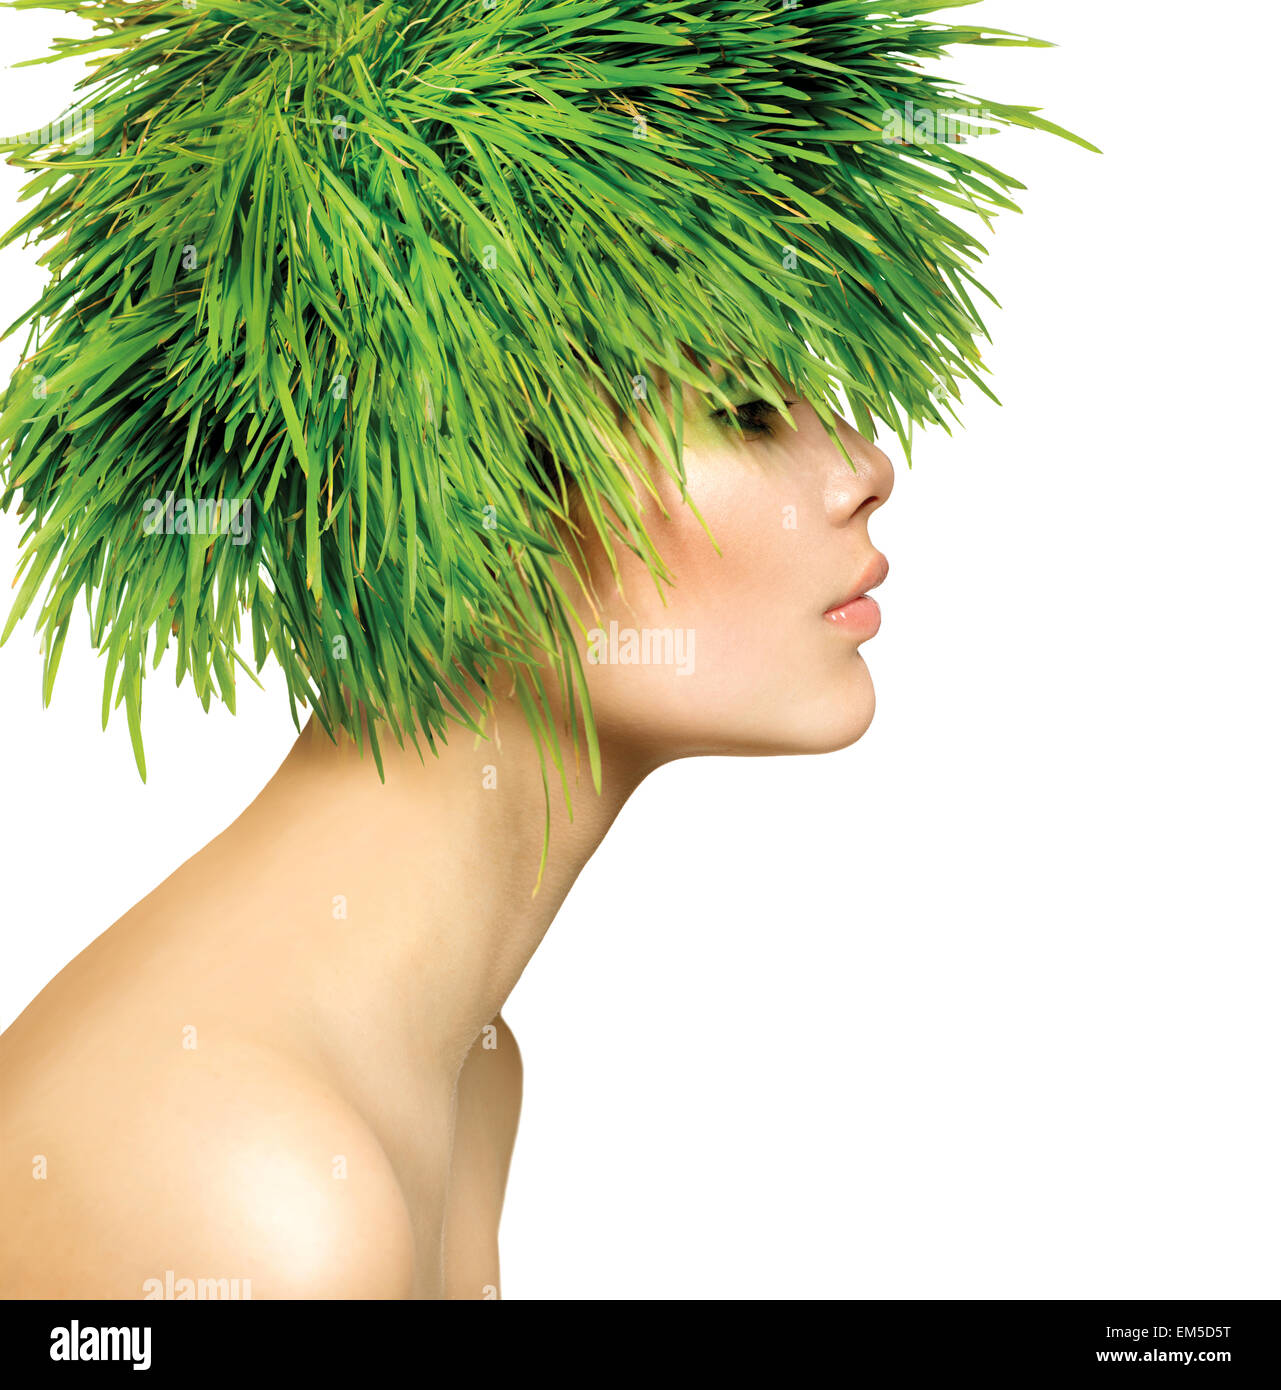 Beauty Spring Woman with Fresh Green Grass Hair Stock Photo